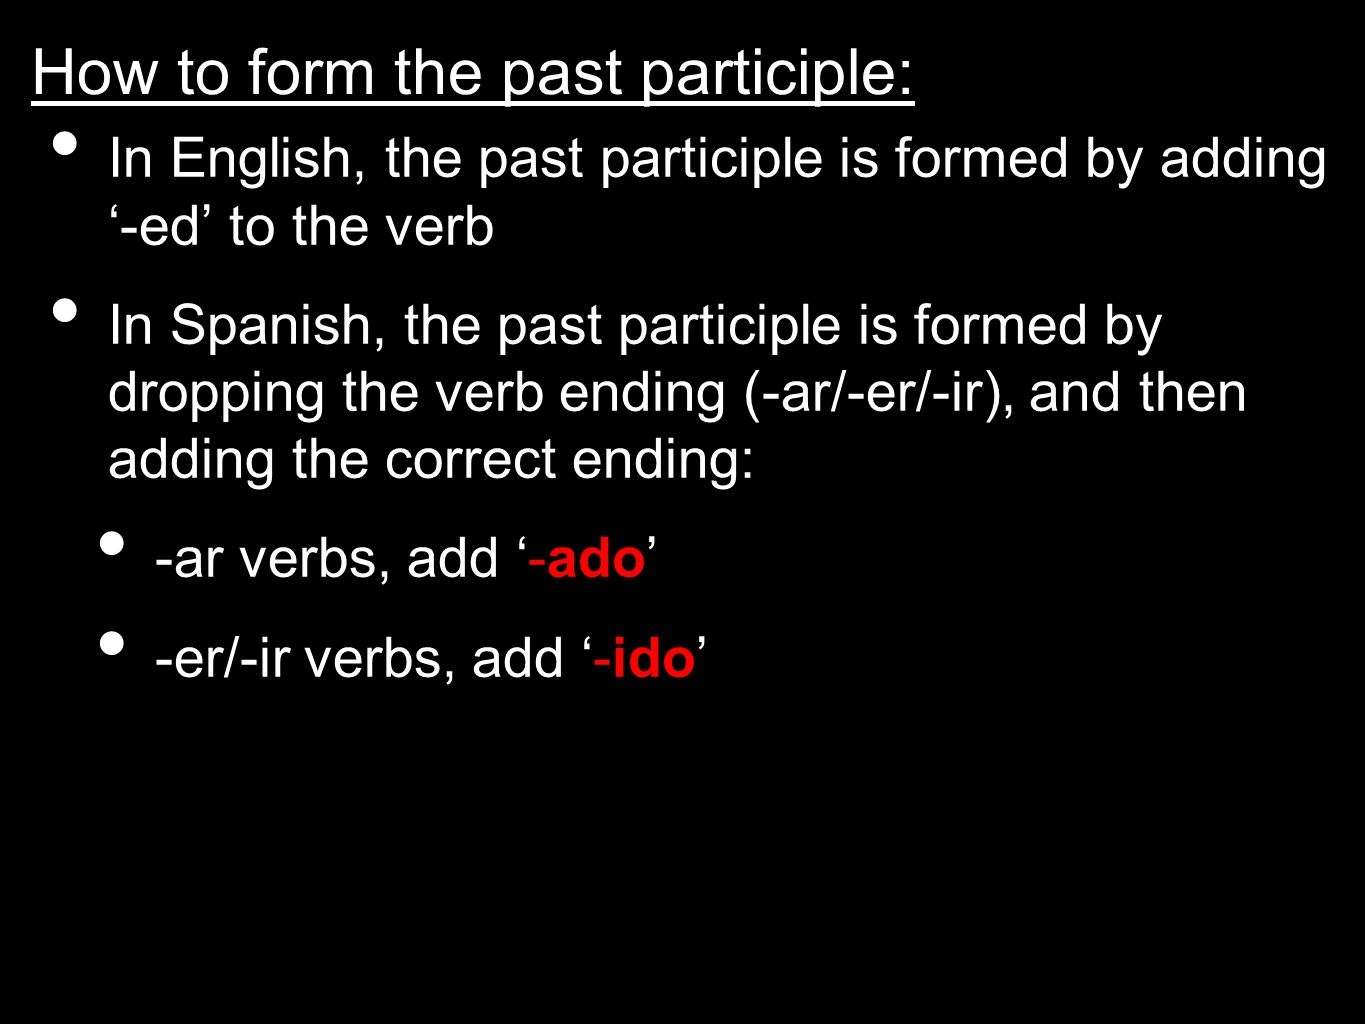 How to form the past participle: In English, the past participle is formed by adding ‘-ed’ to the verb In Spanish, the past participle is formed by dropping the verb ending (-ar/-er/-ir), and then adding the correct ending: -ar verbs, add ‘-ado’ -er/-ir verbs, add ‘-ido’